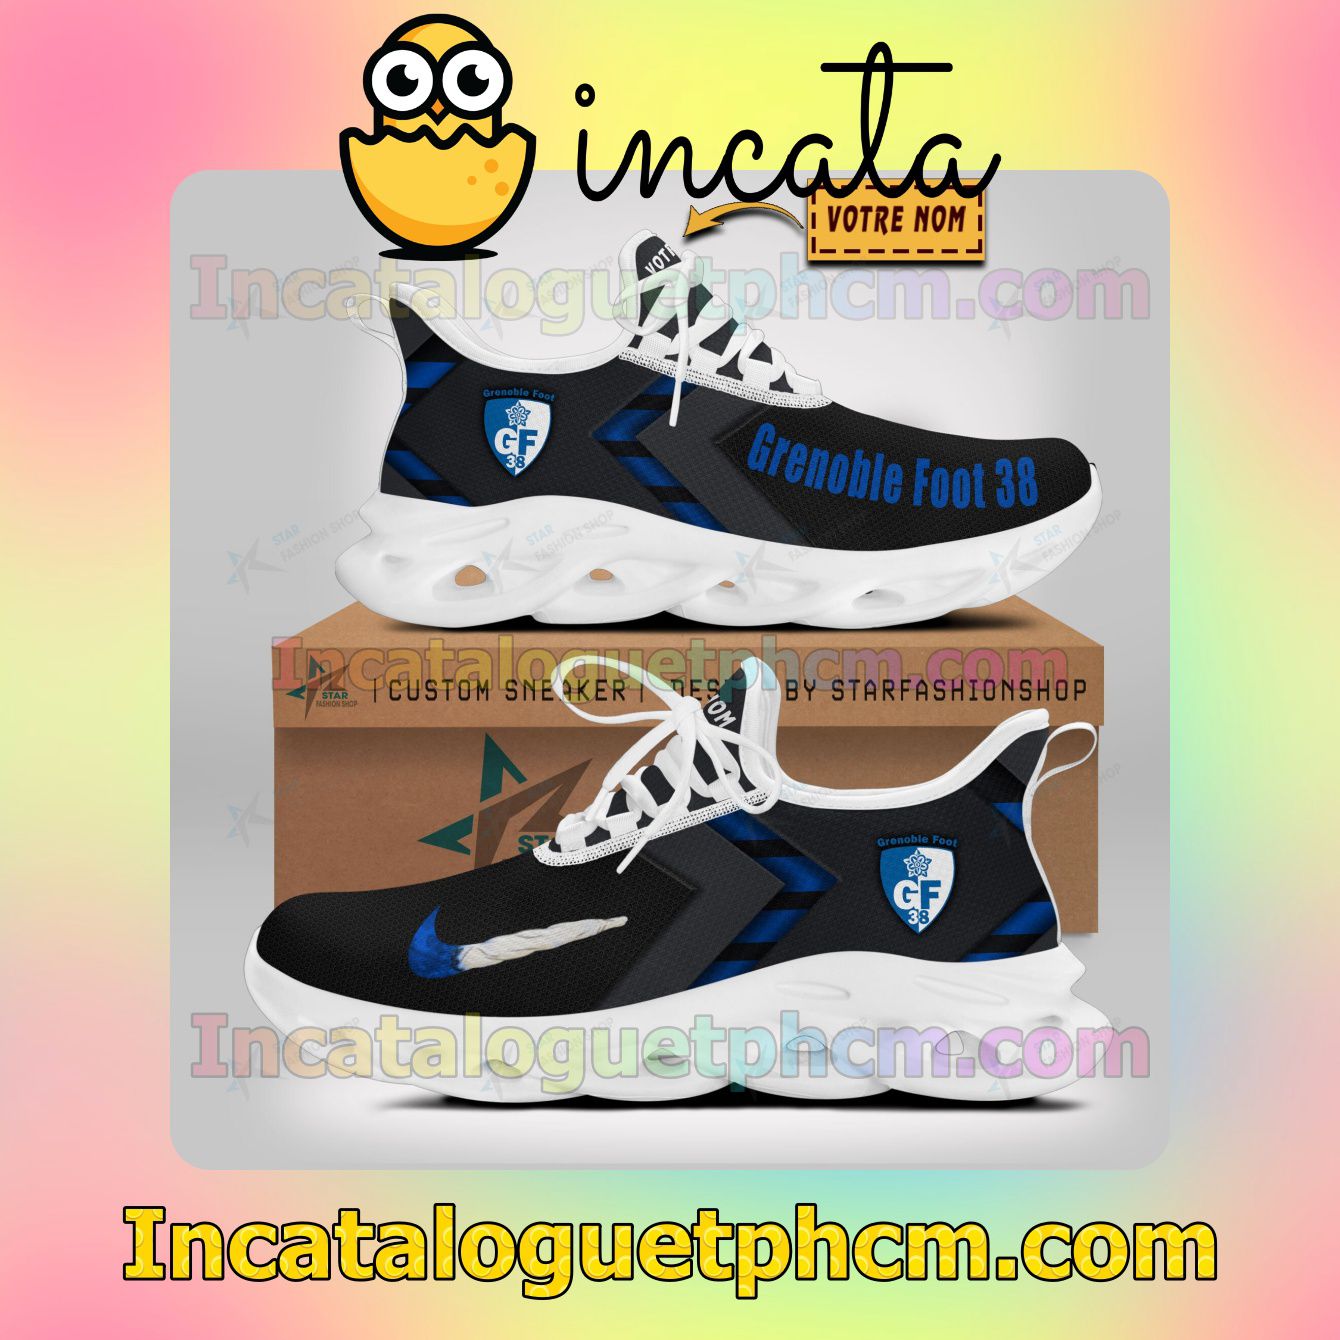 Only For Fan Grenoble Foot 38 Low Top Shoes